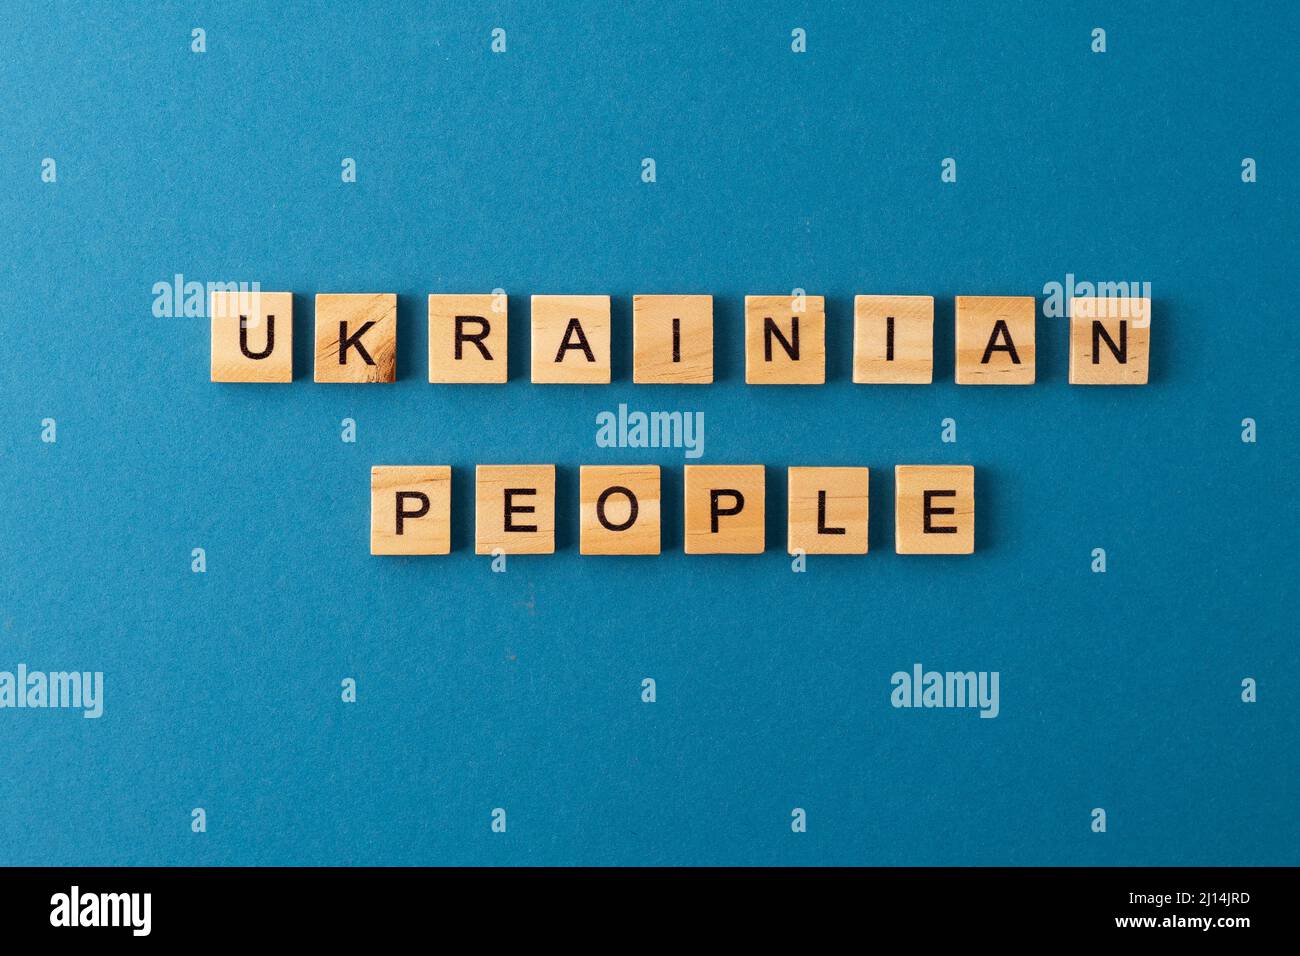 Ukrainian people background. Phrase from wooden letters. Top view words. The phrases is laid out in wood letter. Motivation. Stock Photo